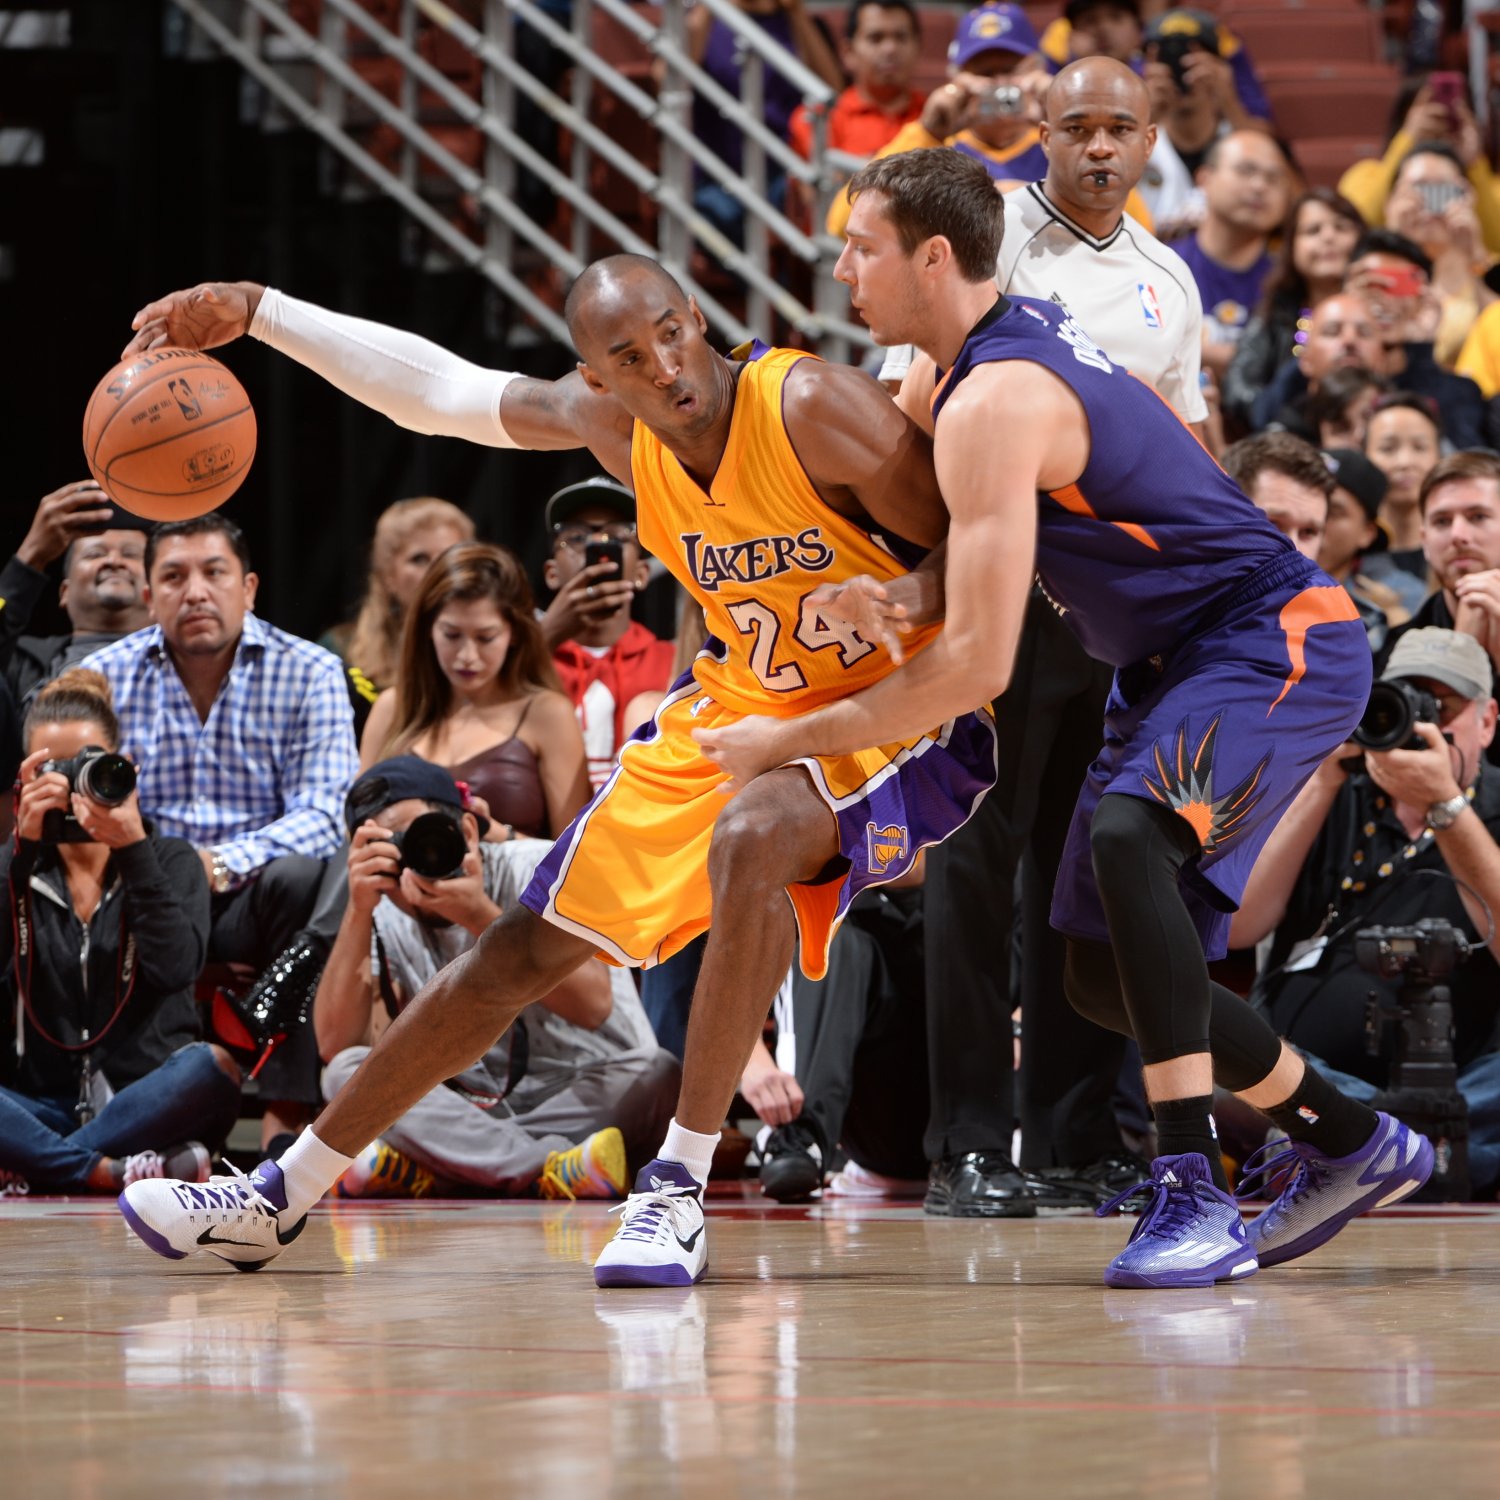 Los Angeles Lakers vs. Phoenix Suns Live Score, Highlights and